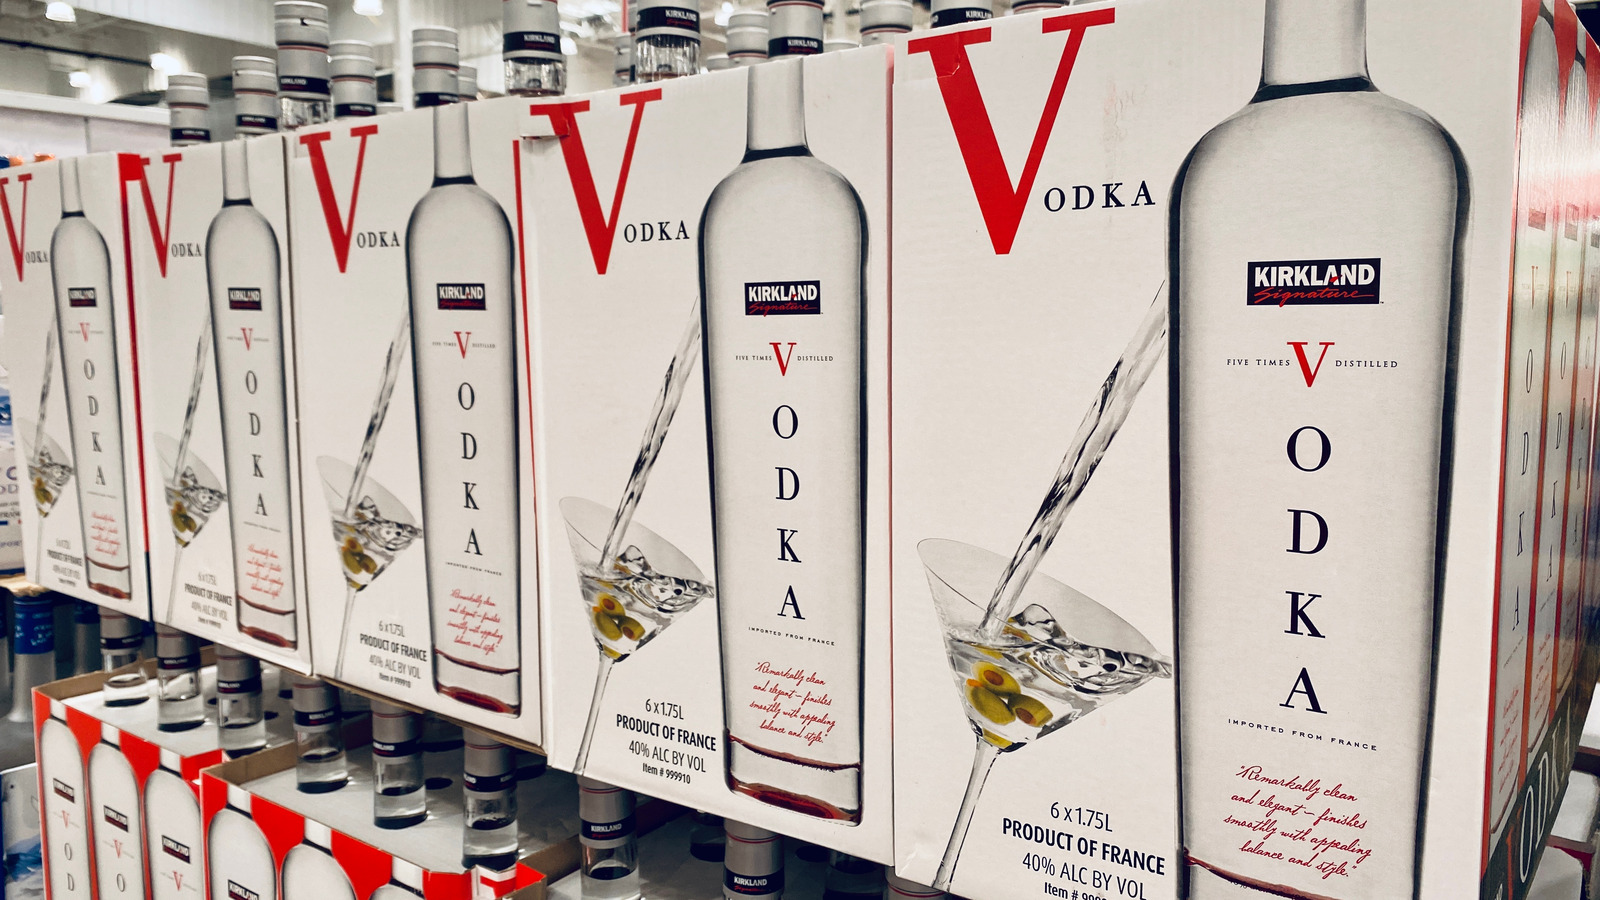 Costco Is Offering A Refund On Kirkland Vodka After Numerous Customer ...